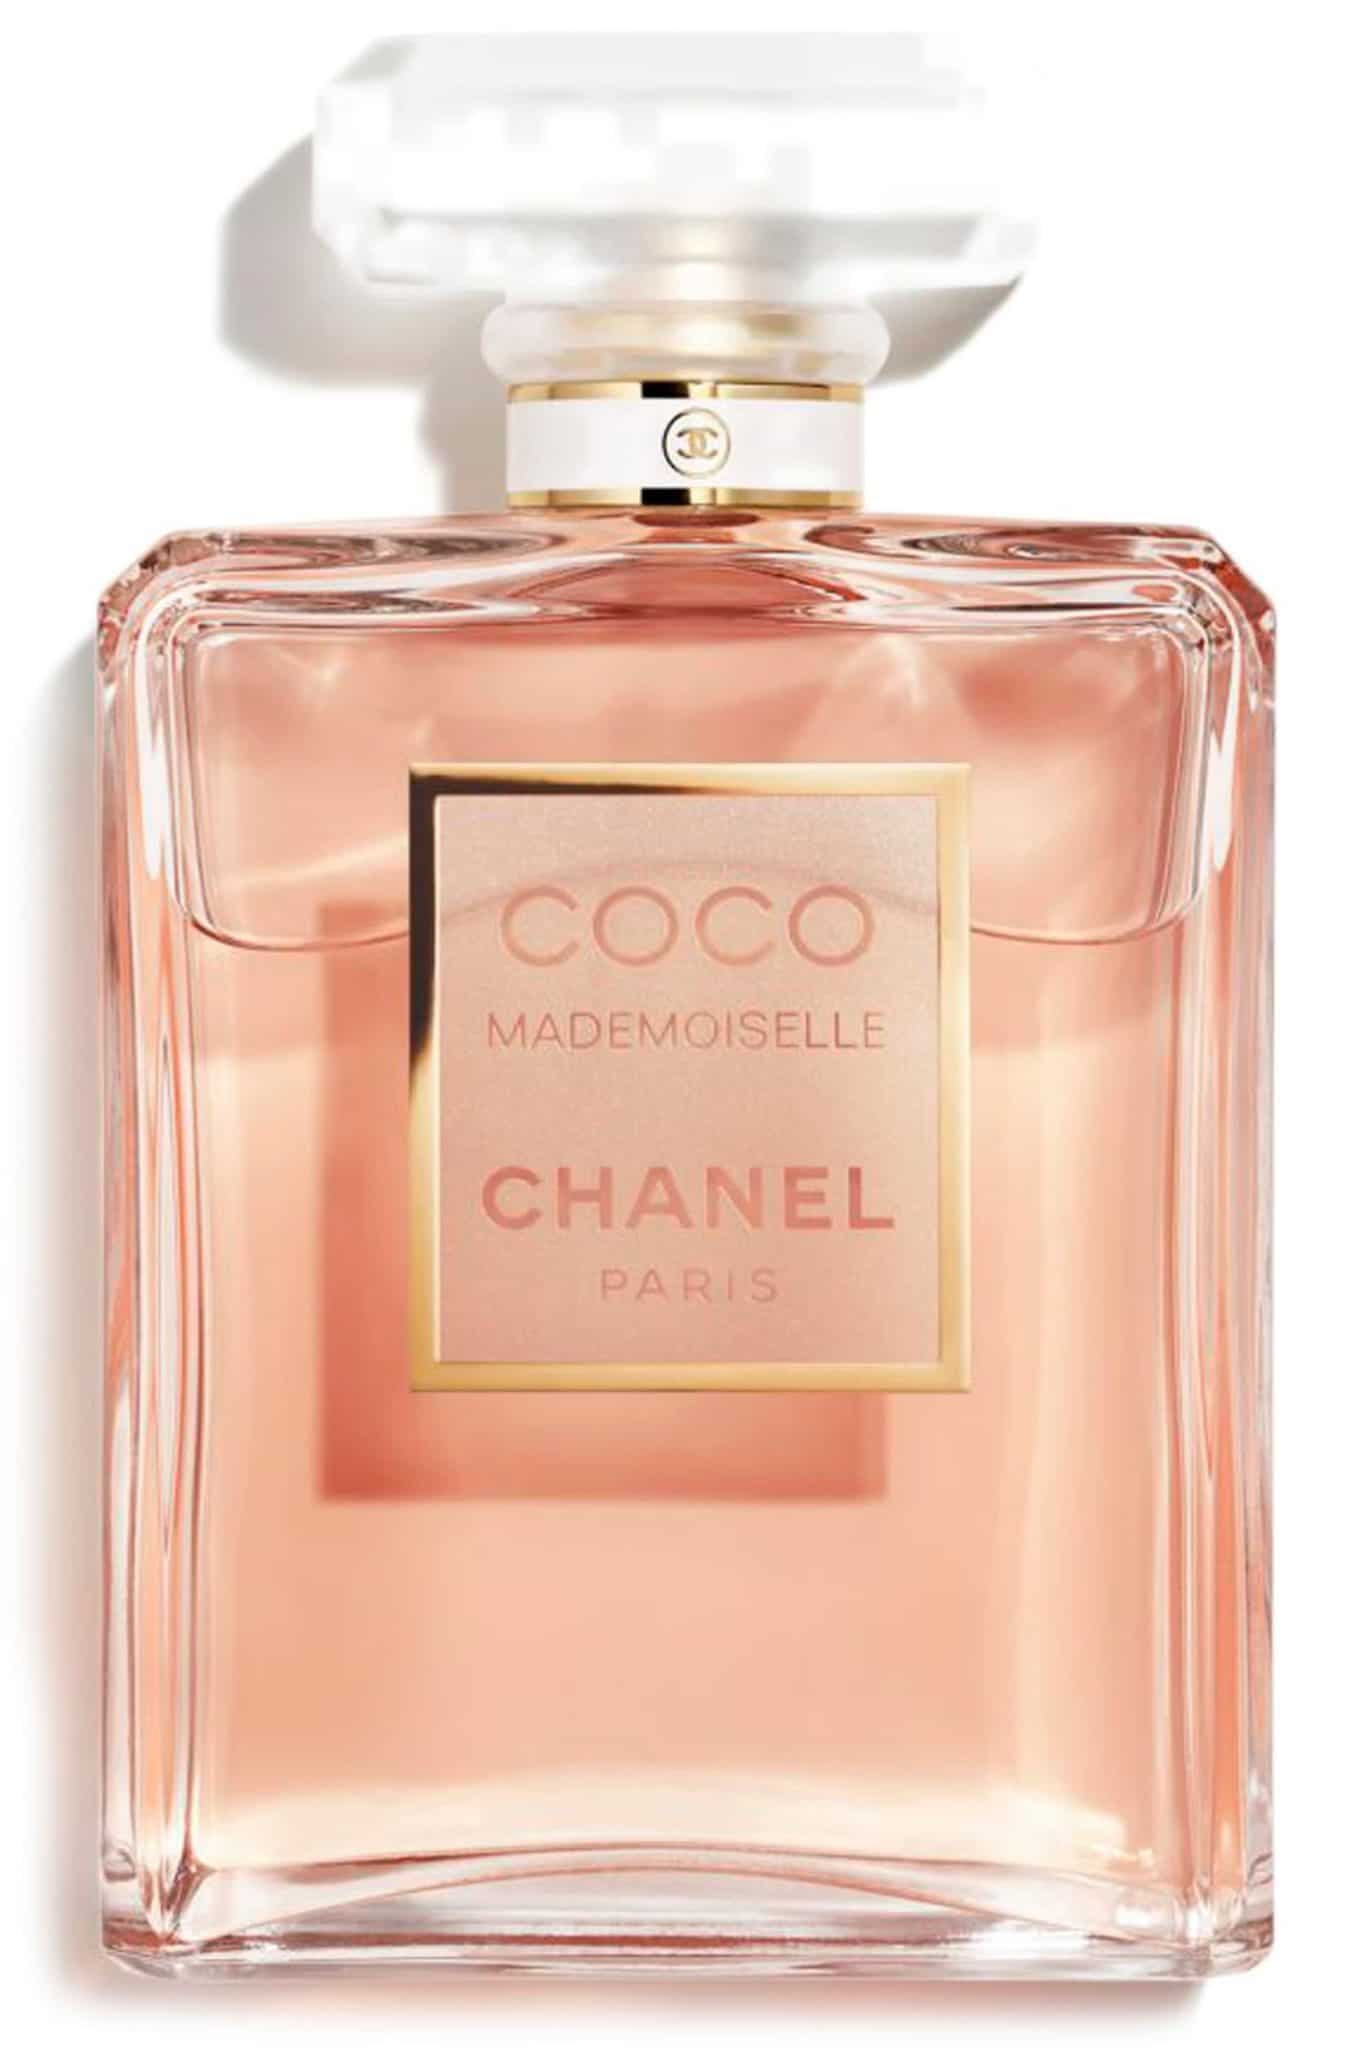 Christmas Gifts For Her 2022: Coco Chanel Perfume For Wife 2022